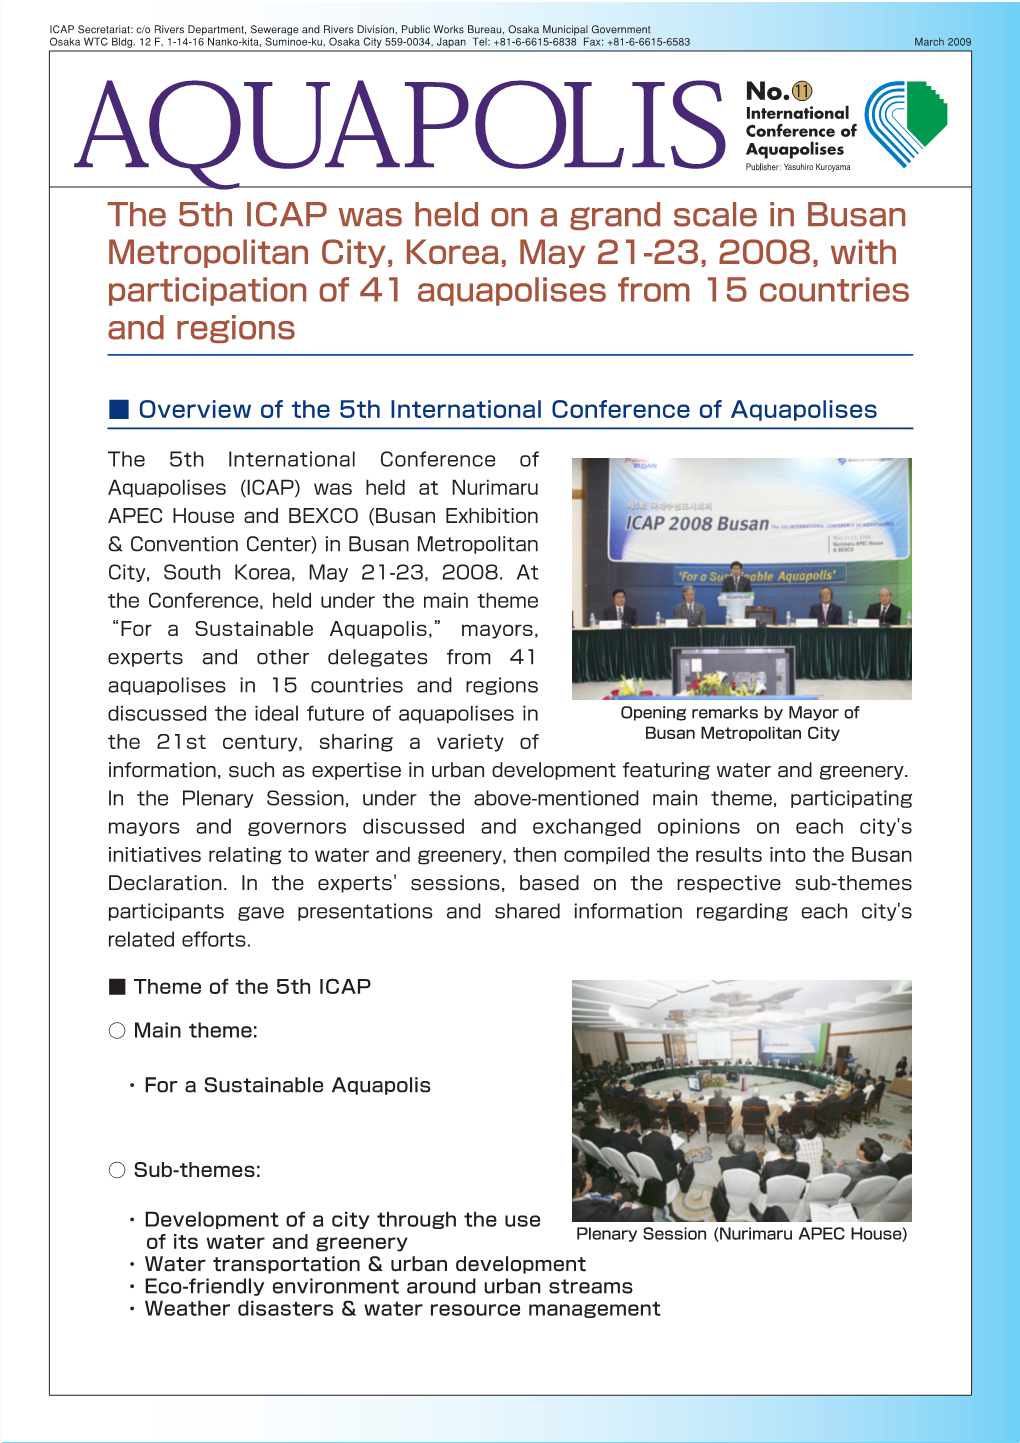 The 5Th ICAP Was Held on a Grand Scale in Busan Metropolitan City, Korea, May 21-23, 2008, with Participation of 41 Aquapolises from 15 Countries and Regions